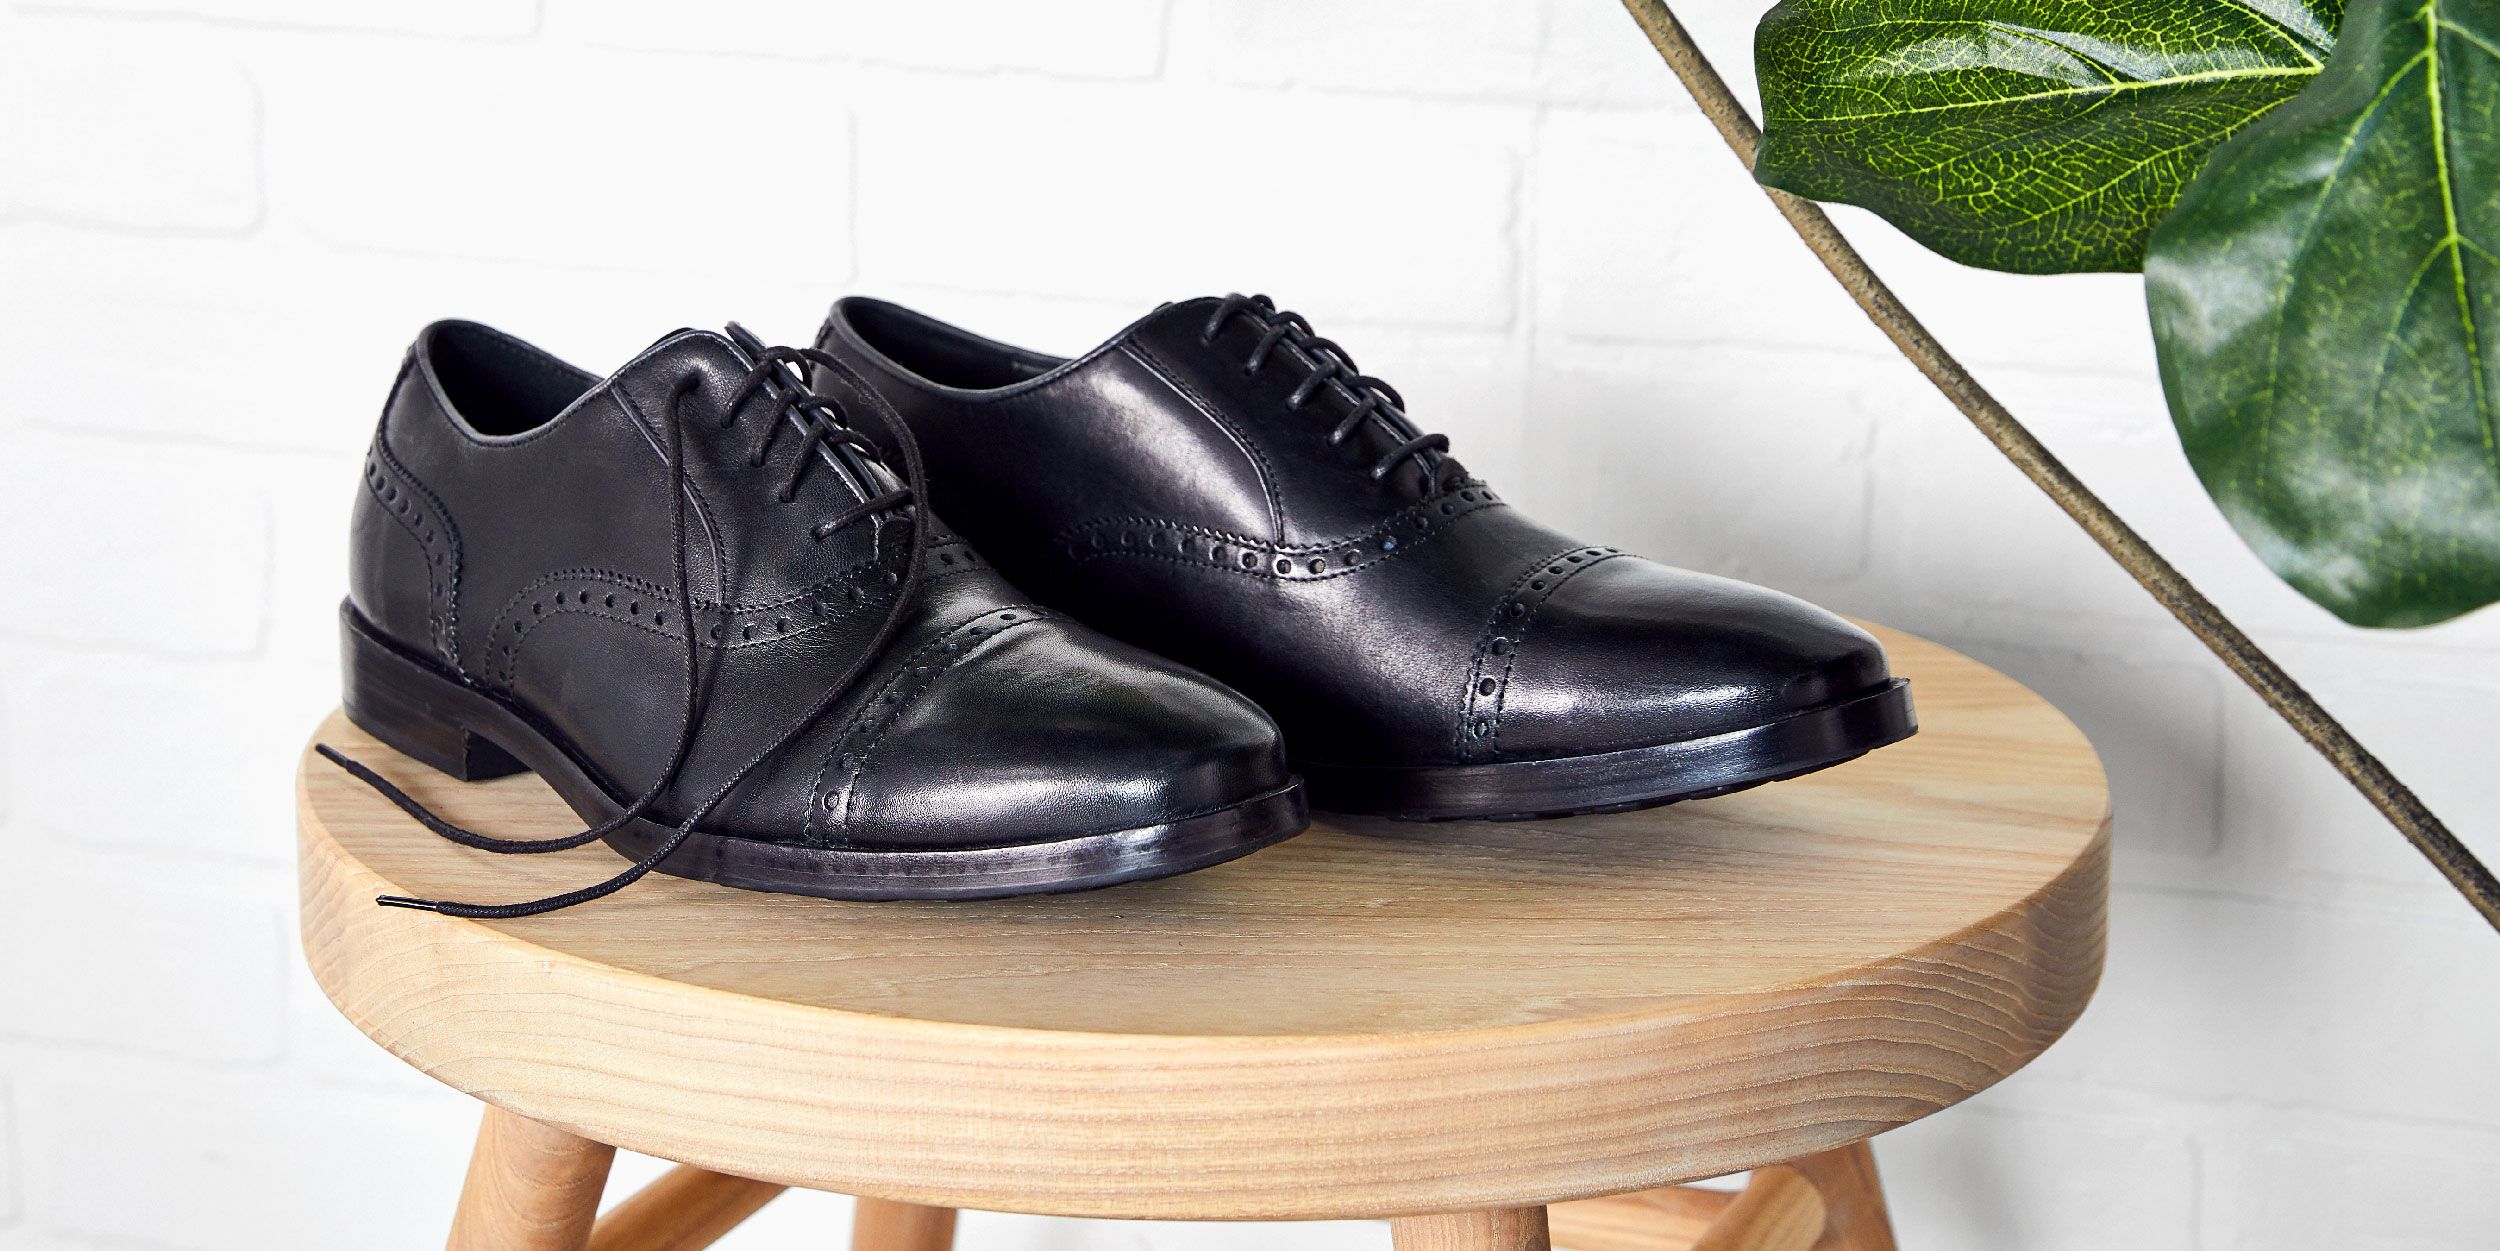 The Essential Dress Shoes That Are as 